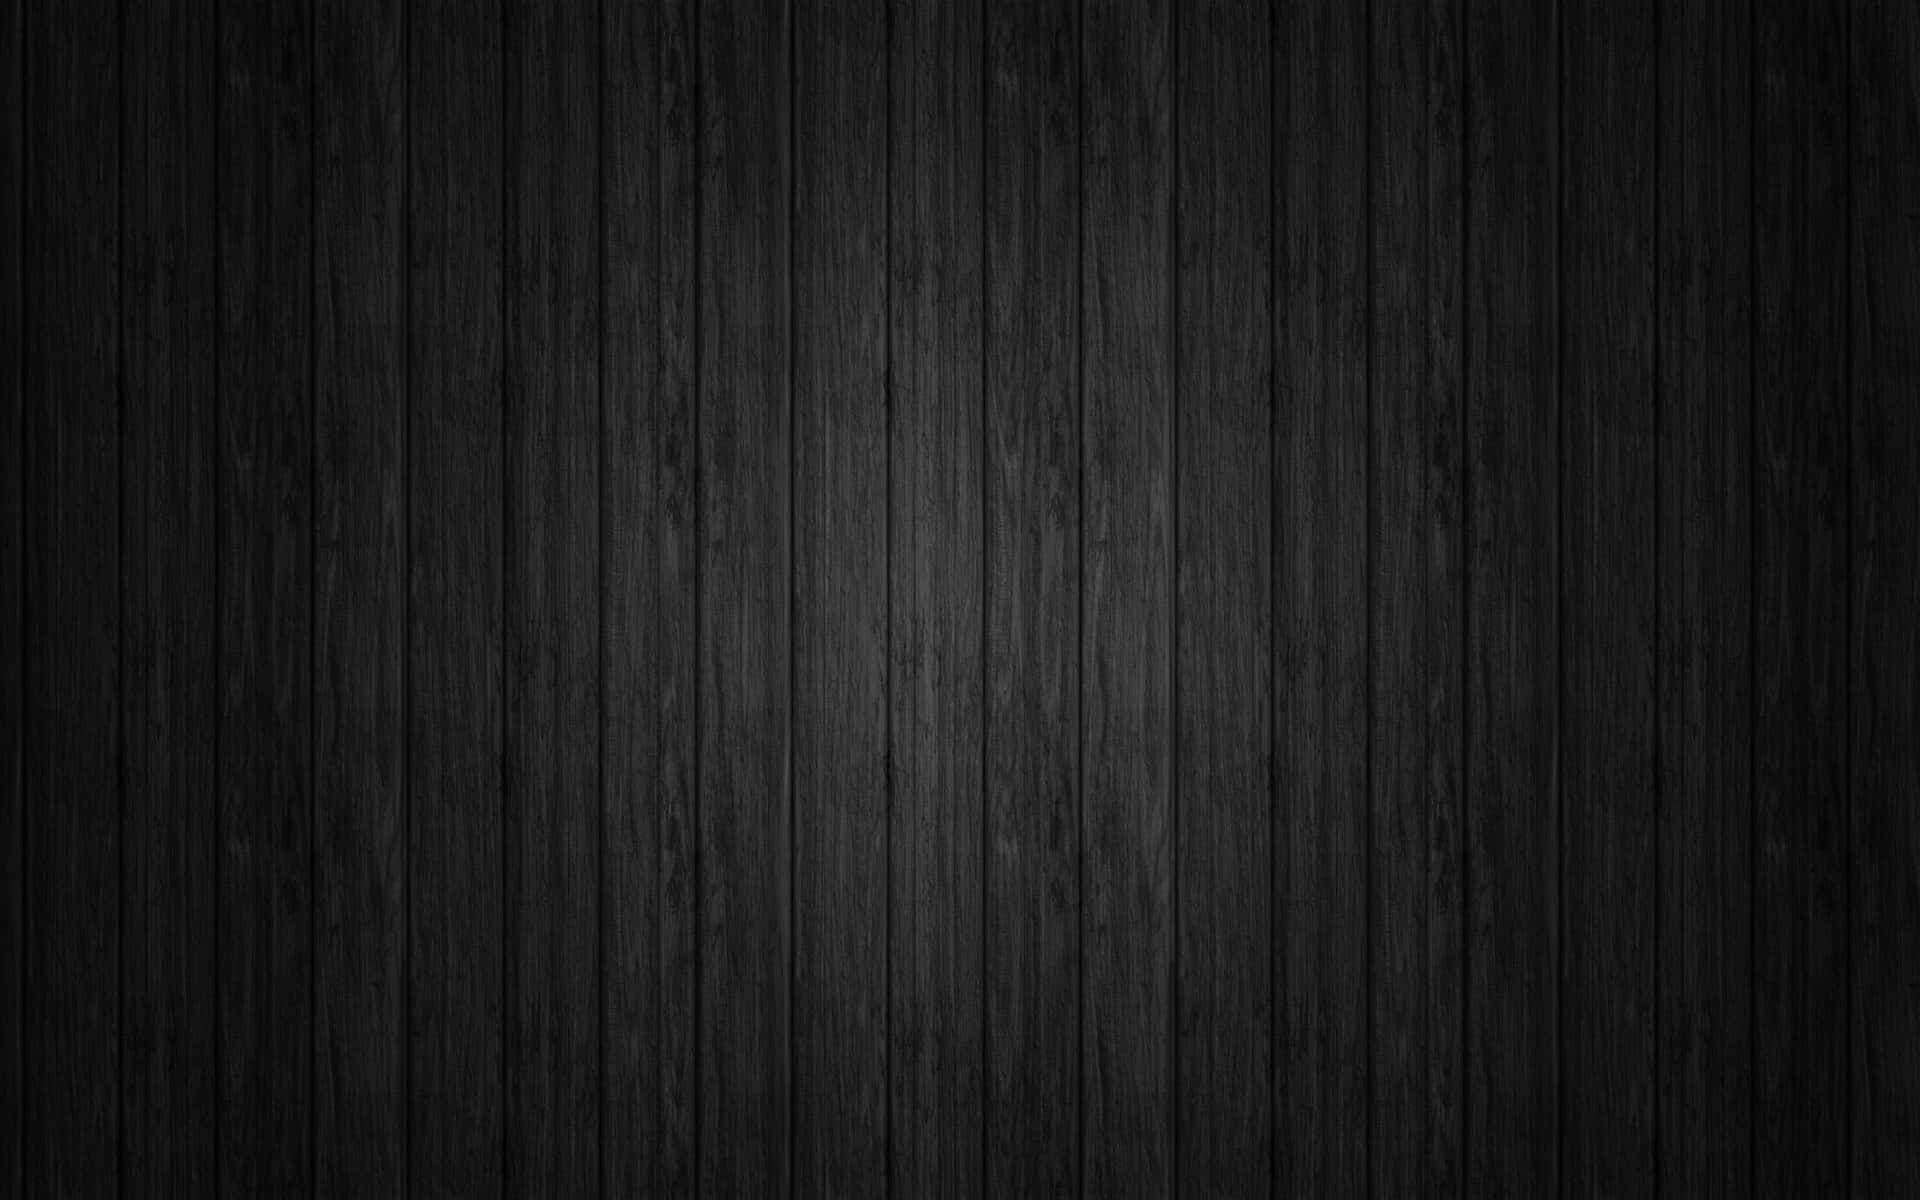 Straight Wooden Black Texture Pictures